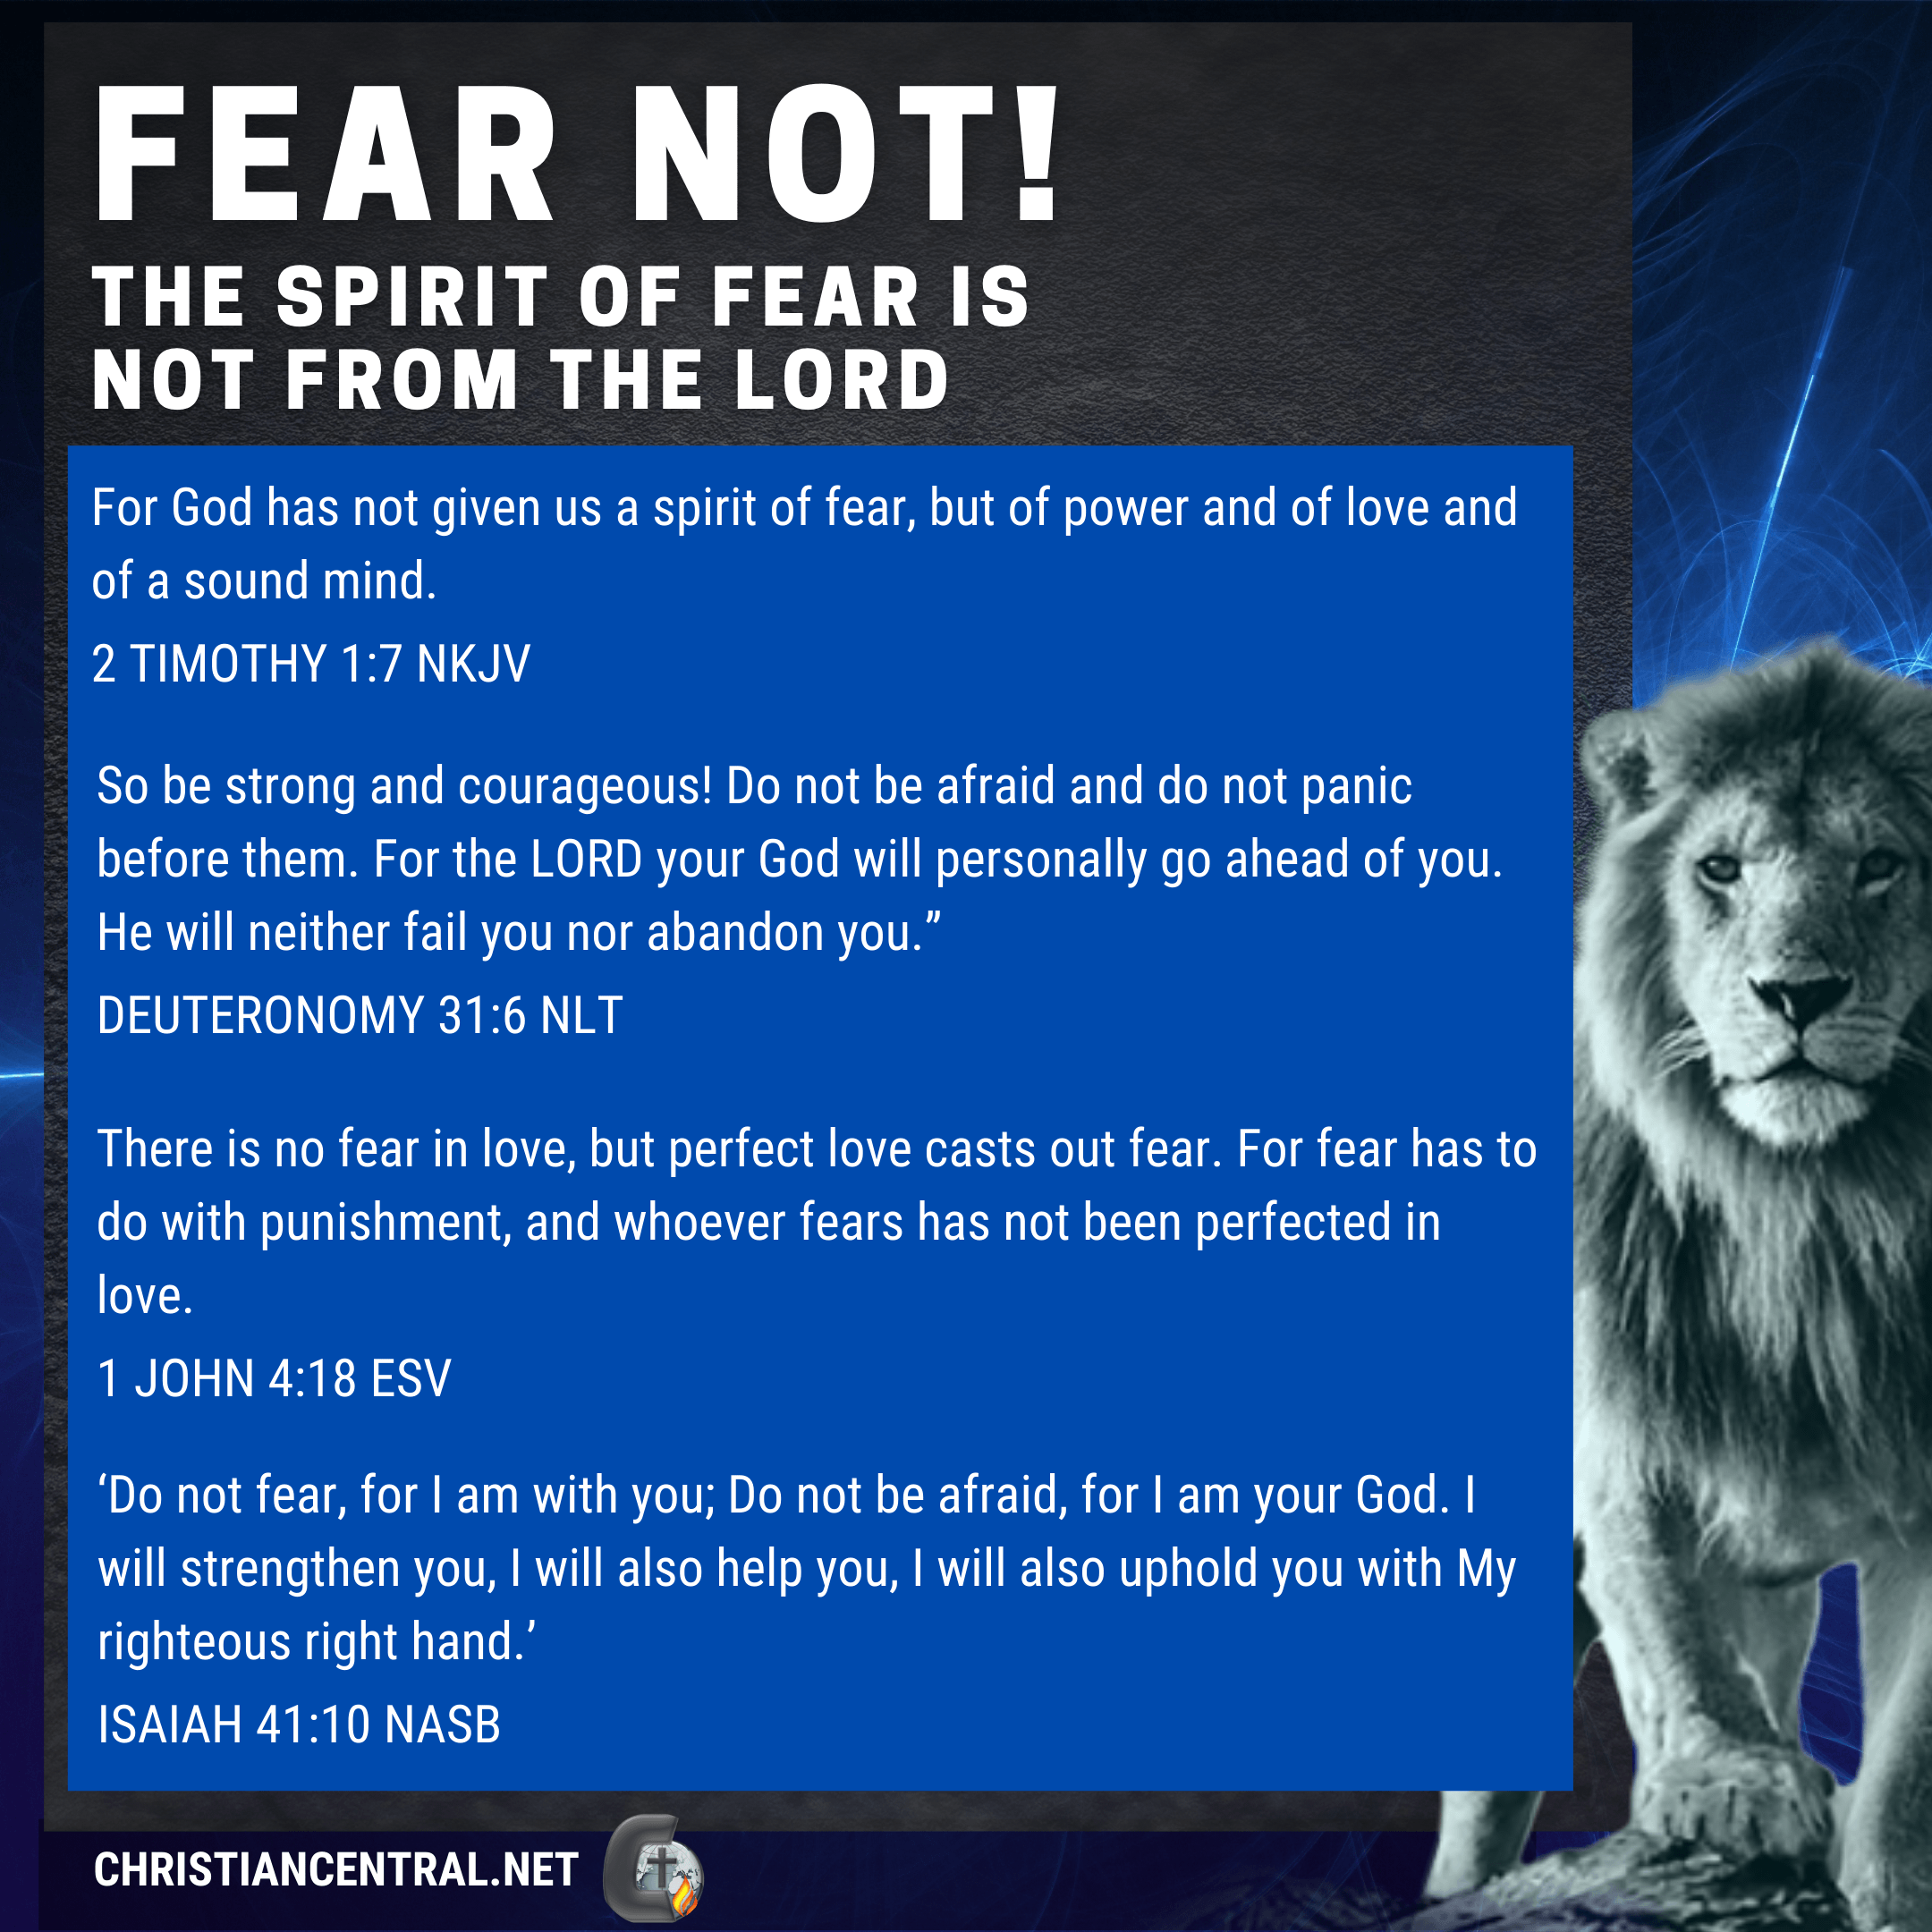 Fear not, the spirit of fear is not from Lord